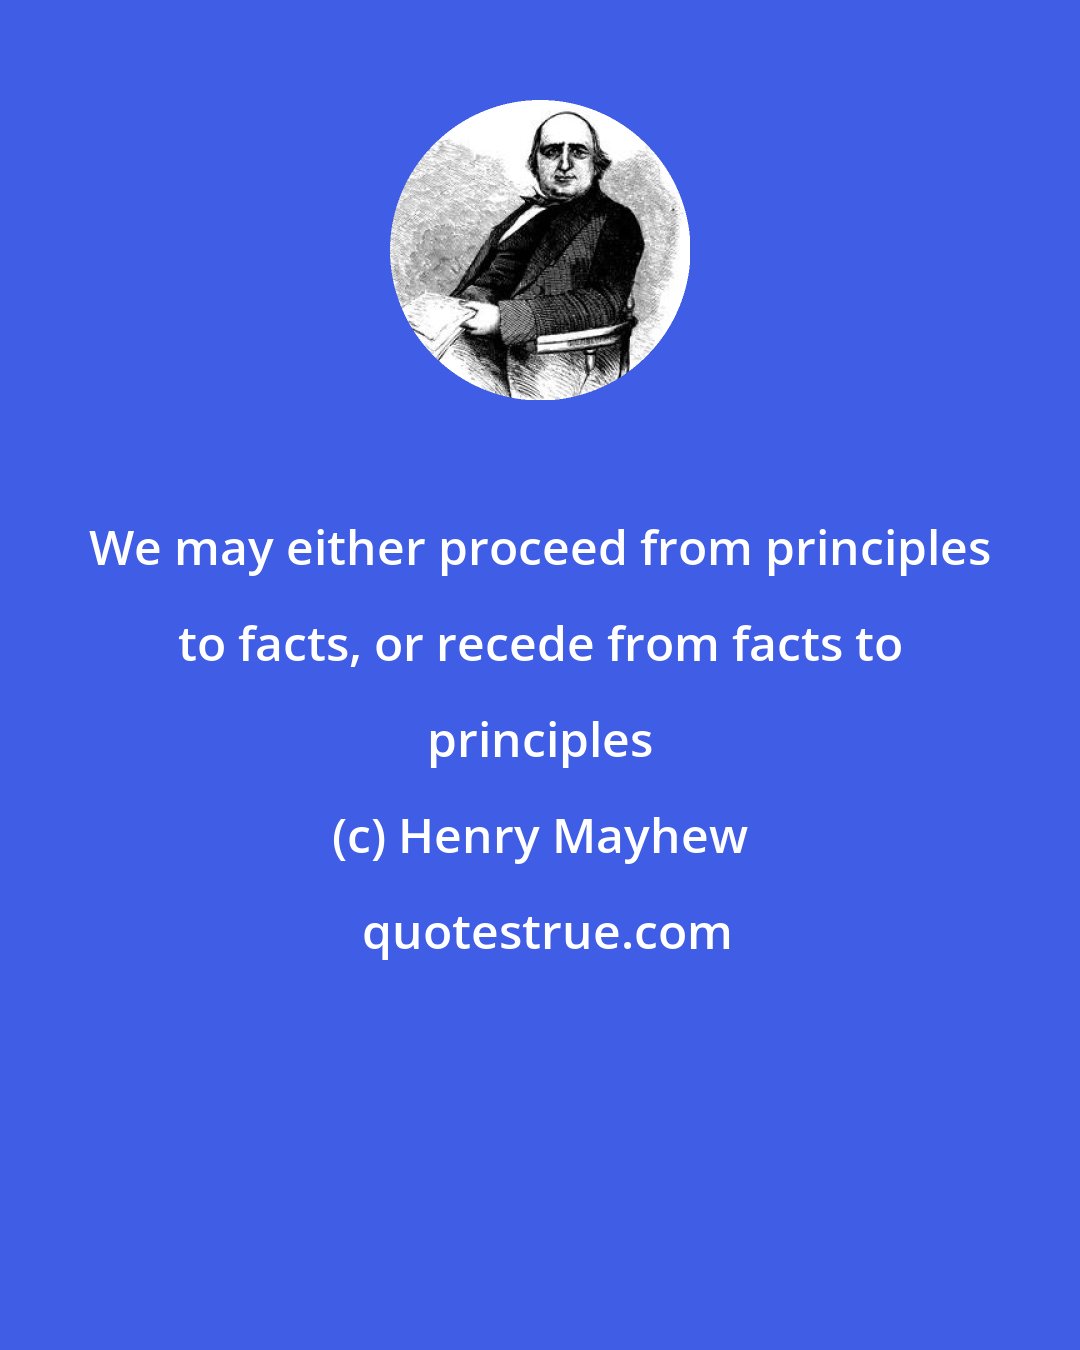 Henry Mayhew: We may either proceed from principles to facts, or recede from facts to principles